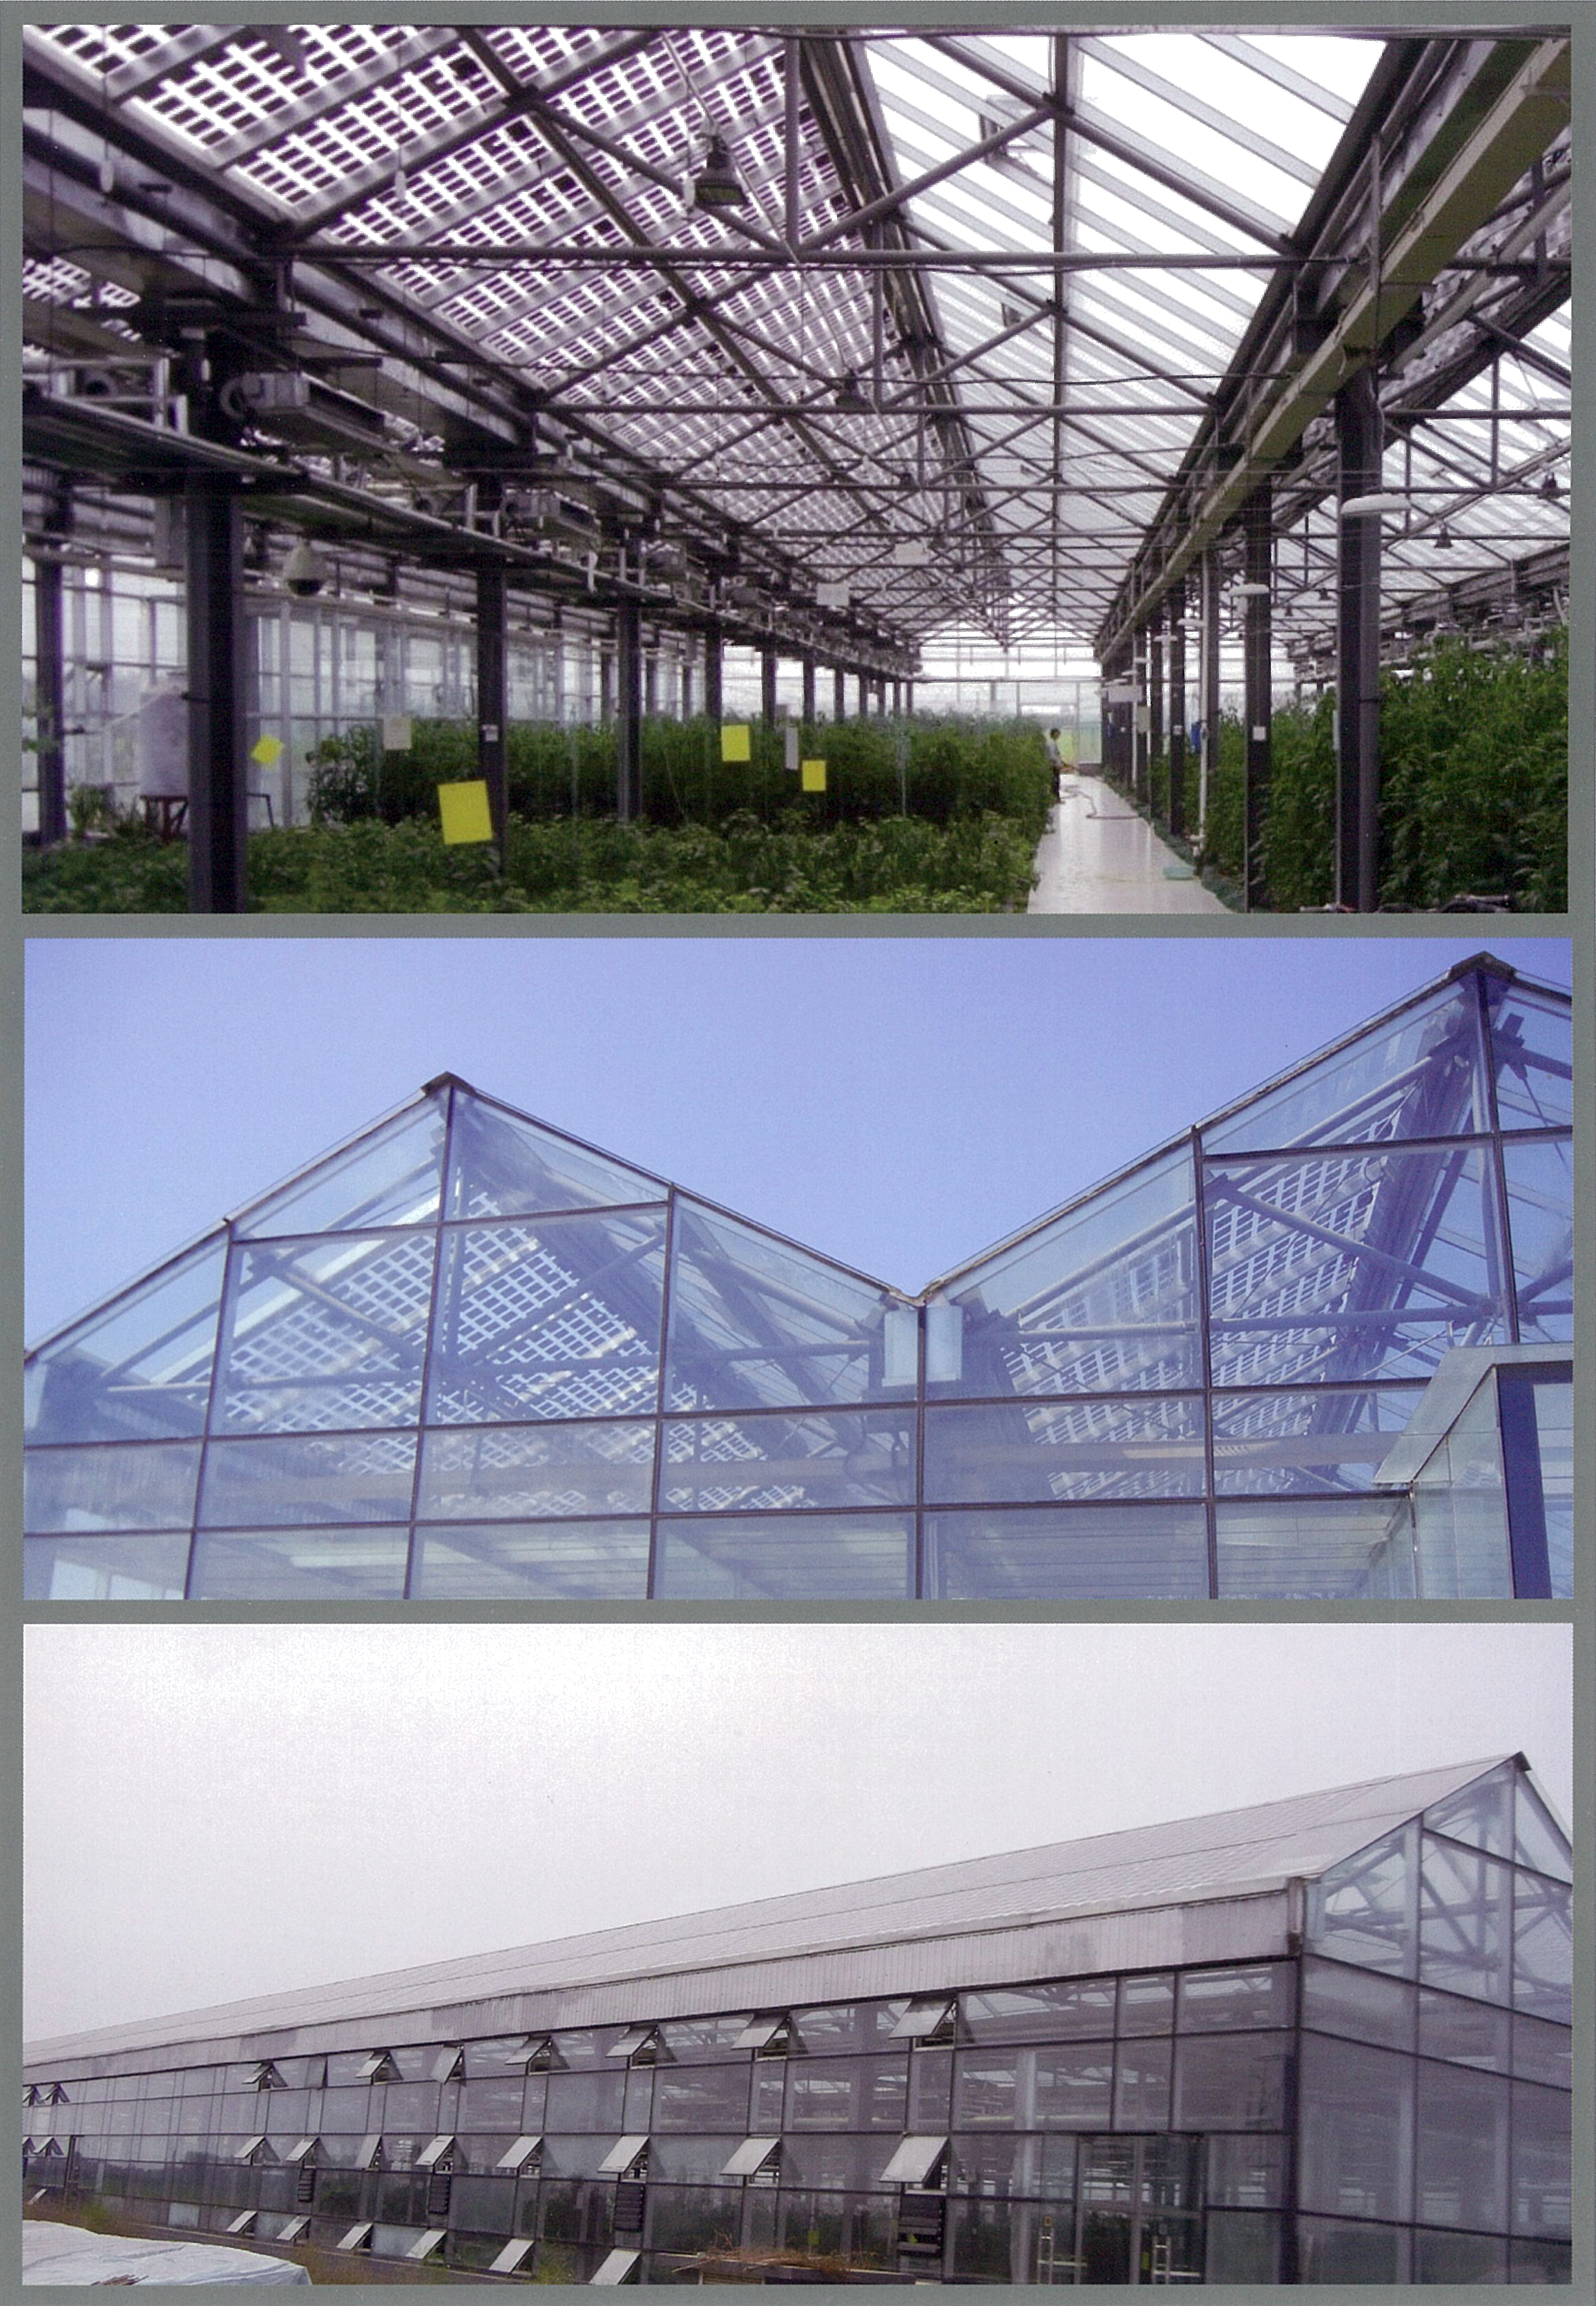 ArchEnergy supplies greenhouses powered by solar panels.